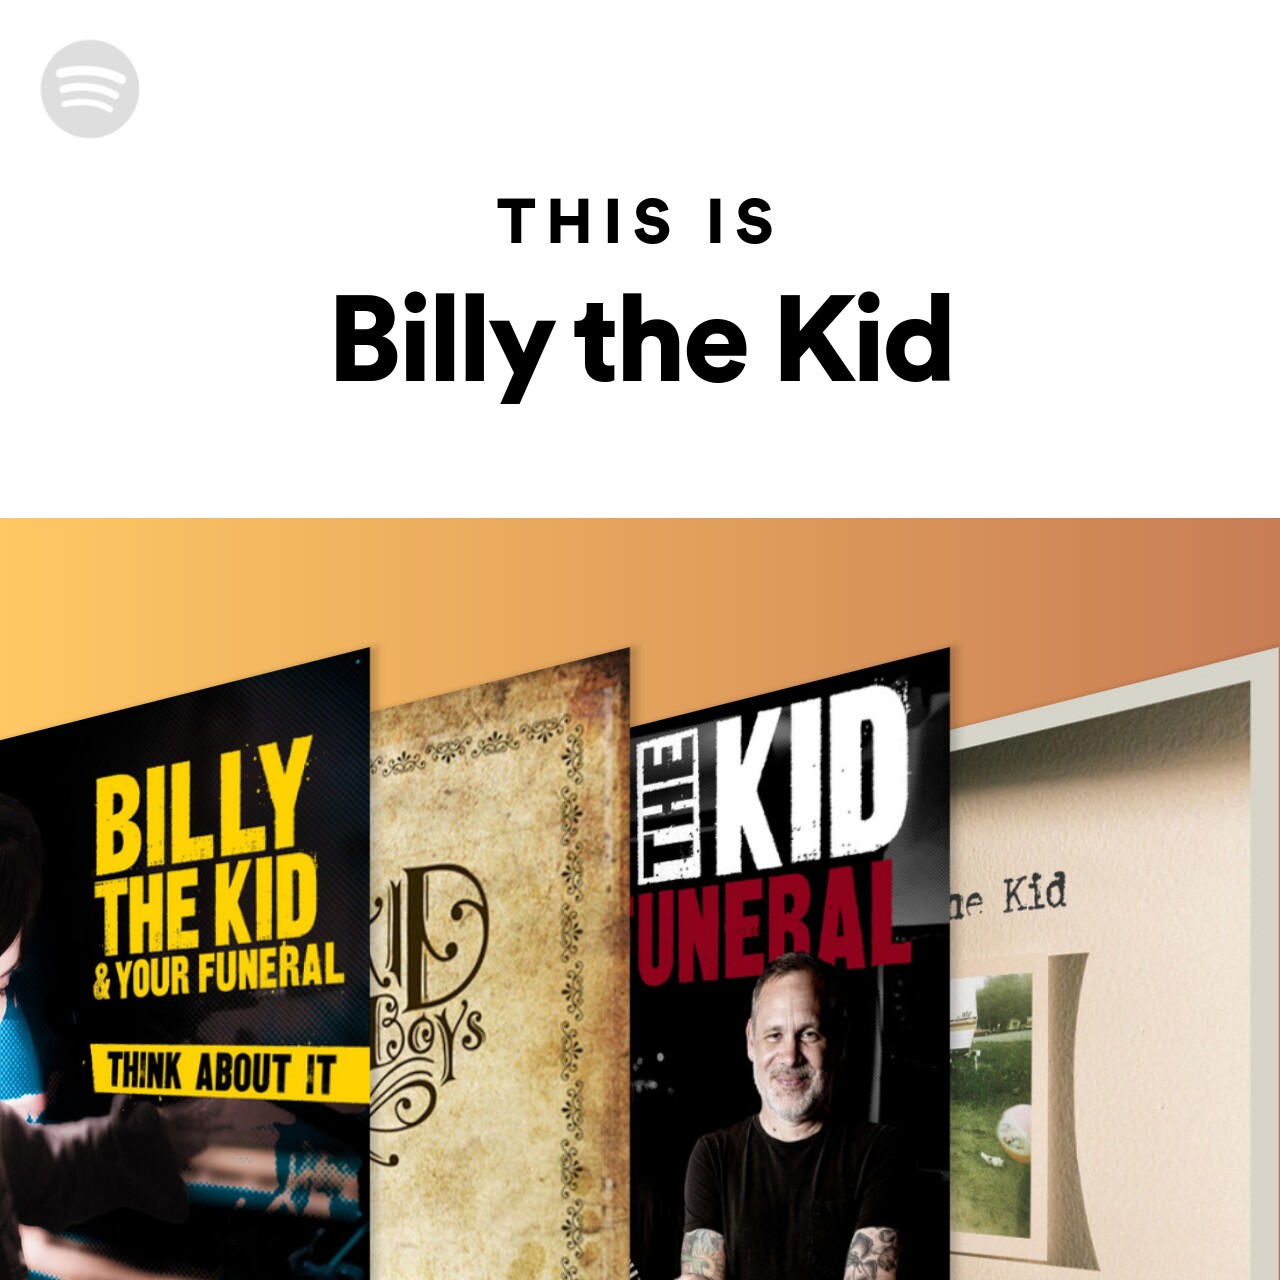 This Is Billy the Kid